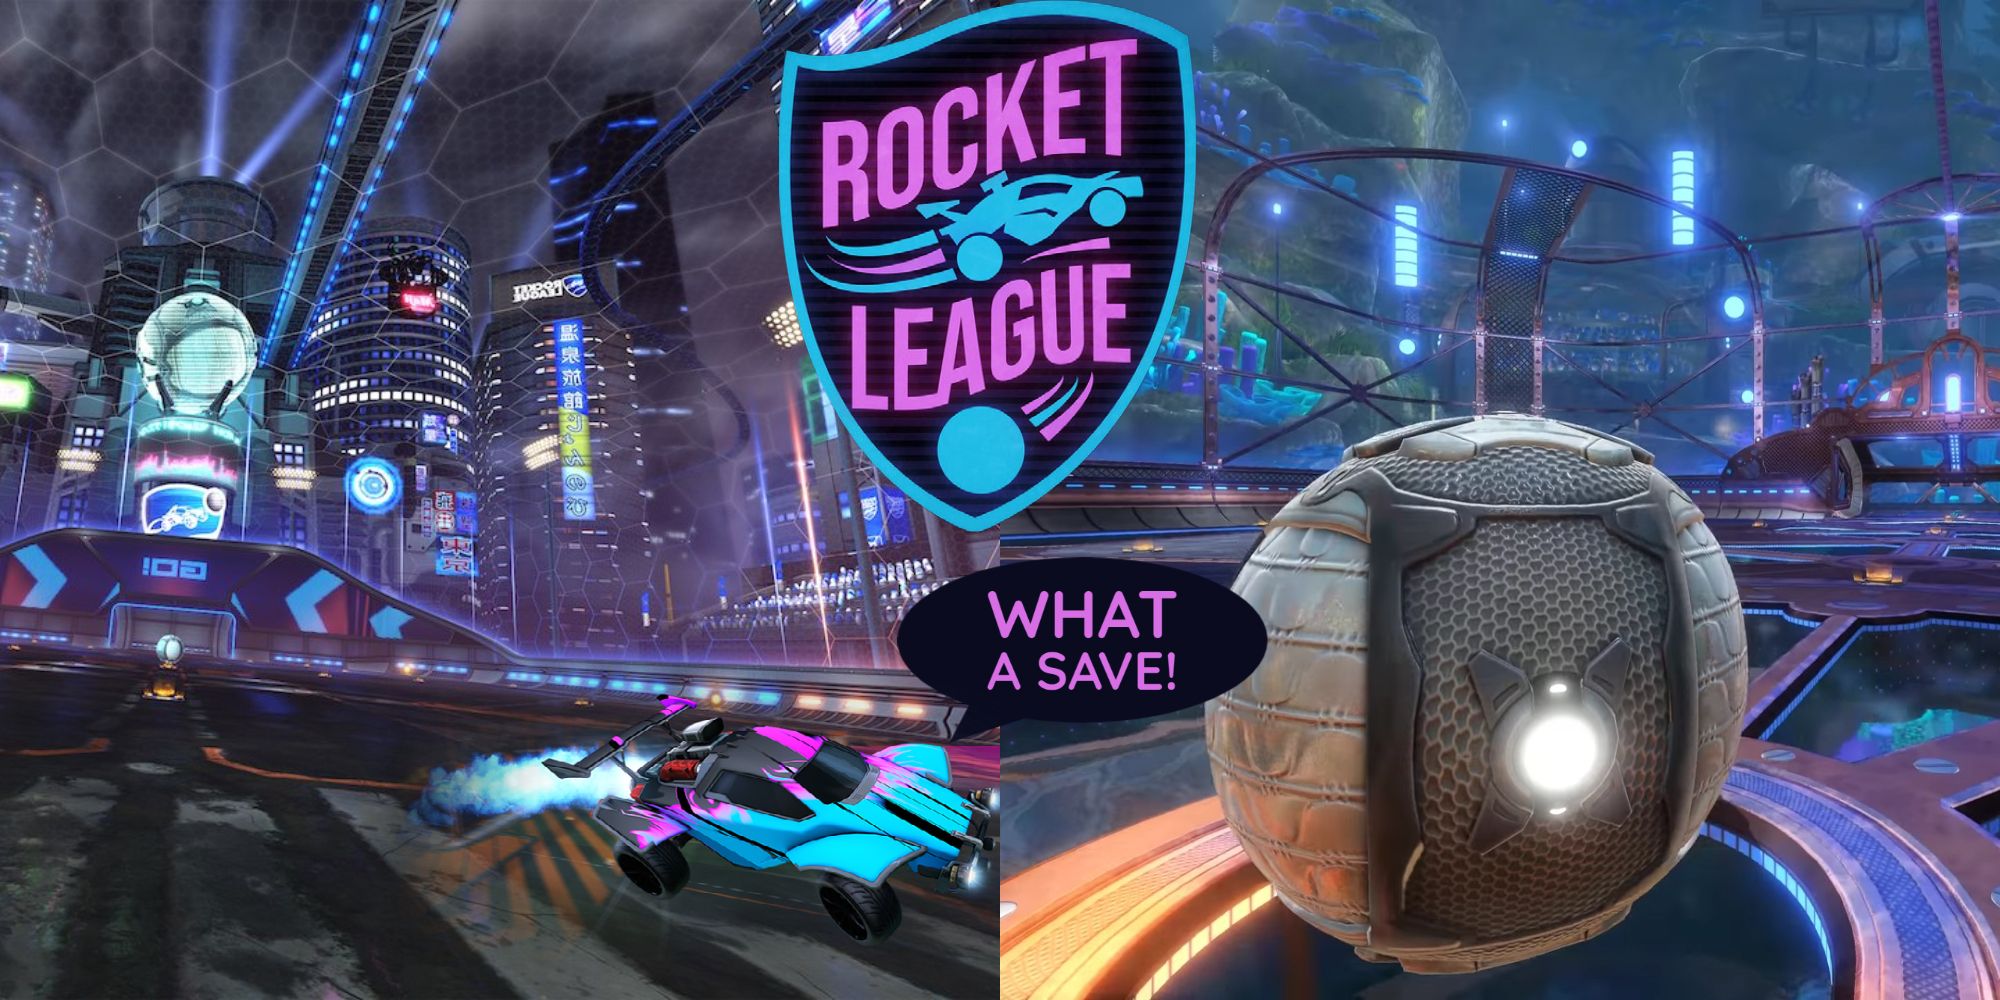 ID Epic games for Rocket Liga. You are not connected TP Epic games Rocket League.